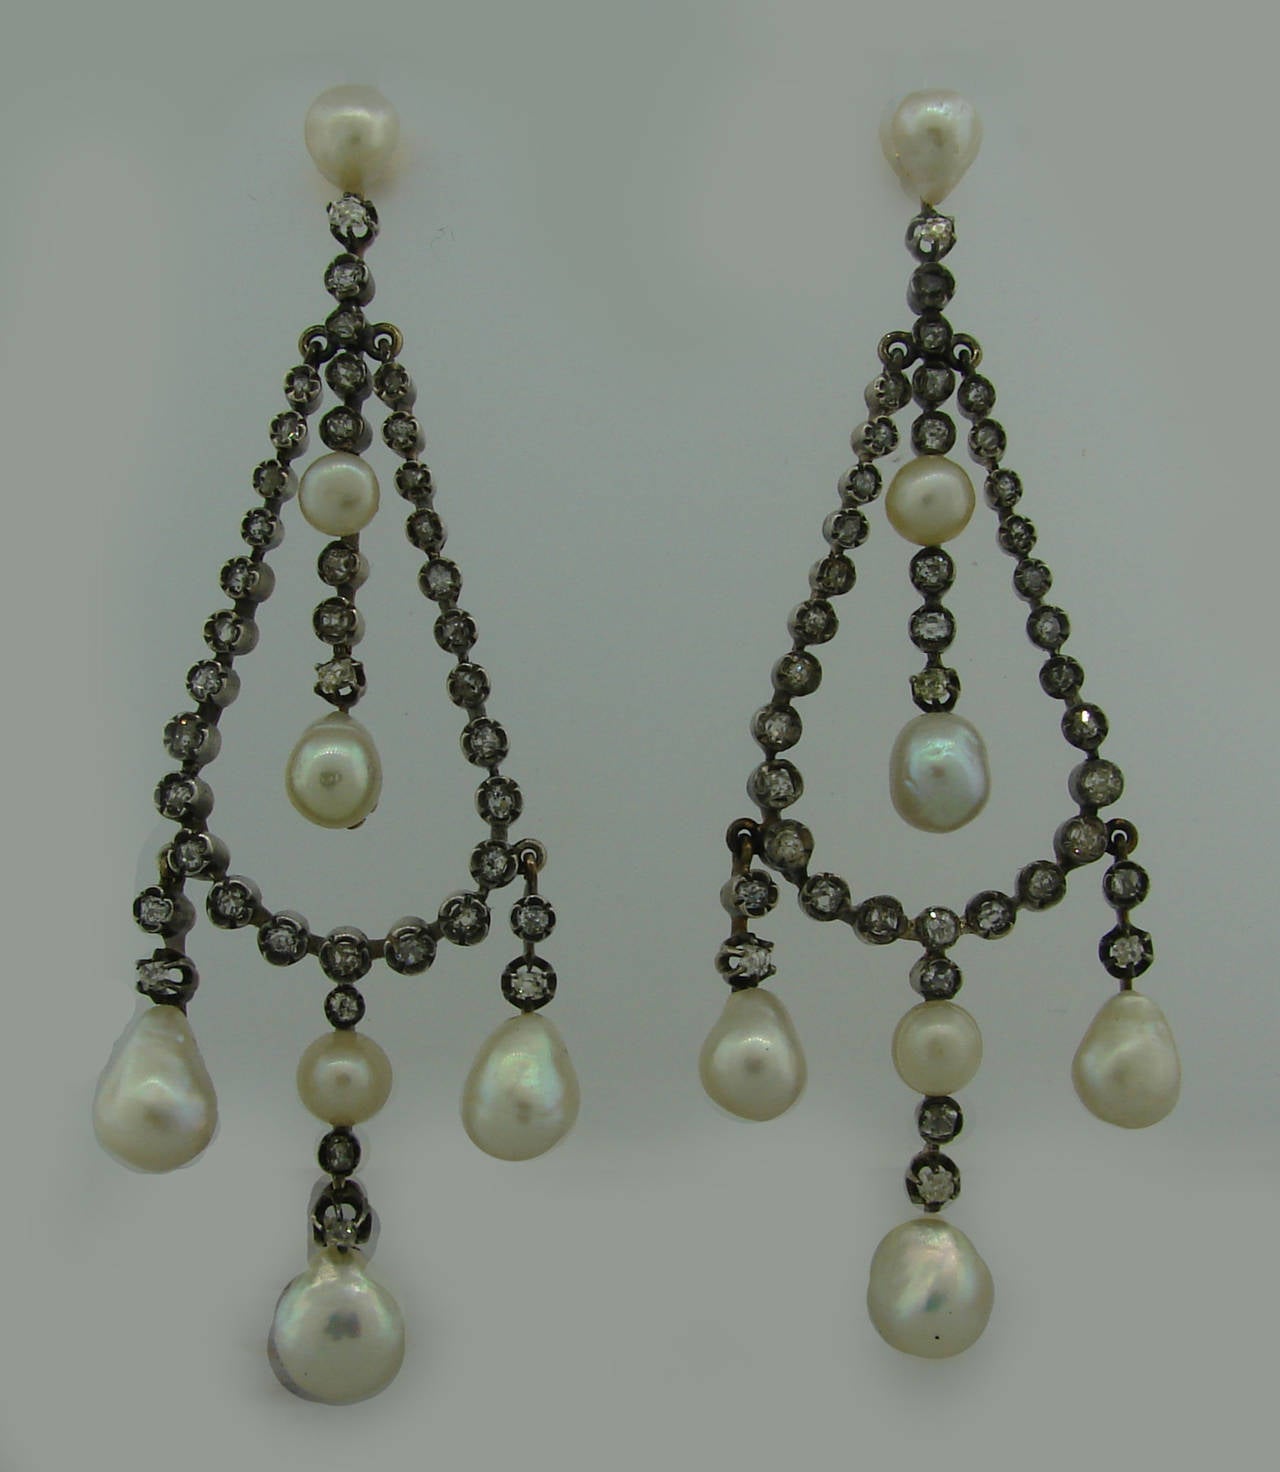 Magnificent antique Victorian earrings! From Fred Leighton Collection. Featuring fourteen natural saltwater pearls ranging from 5.24 mm to 8.85 mm - they come with a GIA natural Pearl Identification Report. The earrings are made of silver and yellow